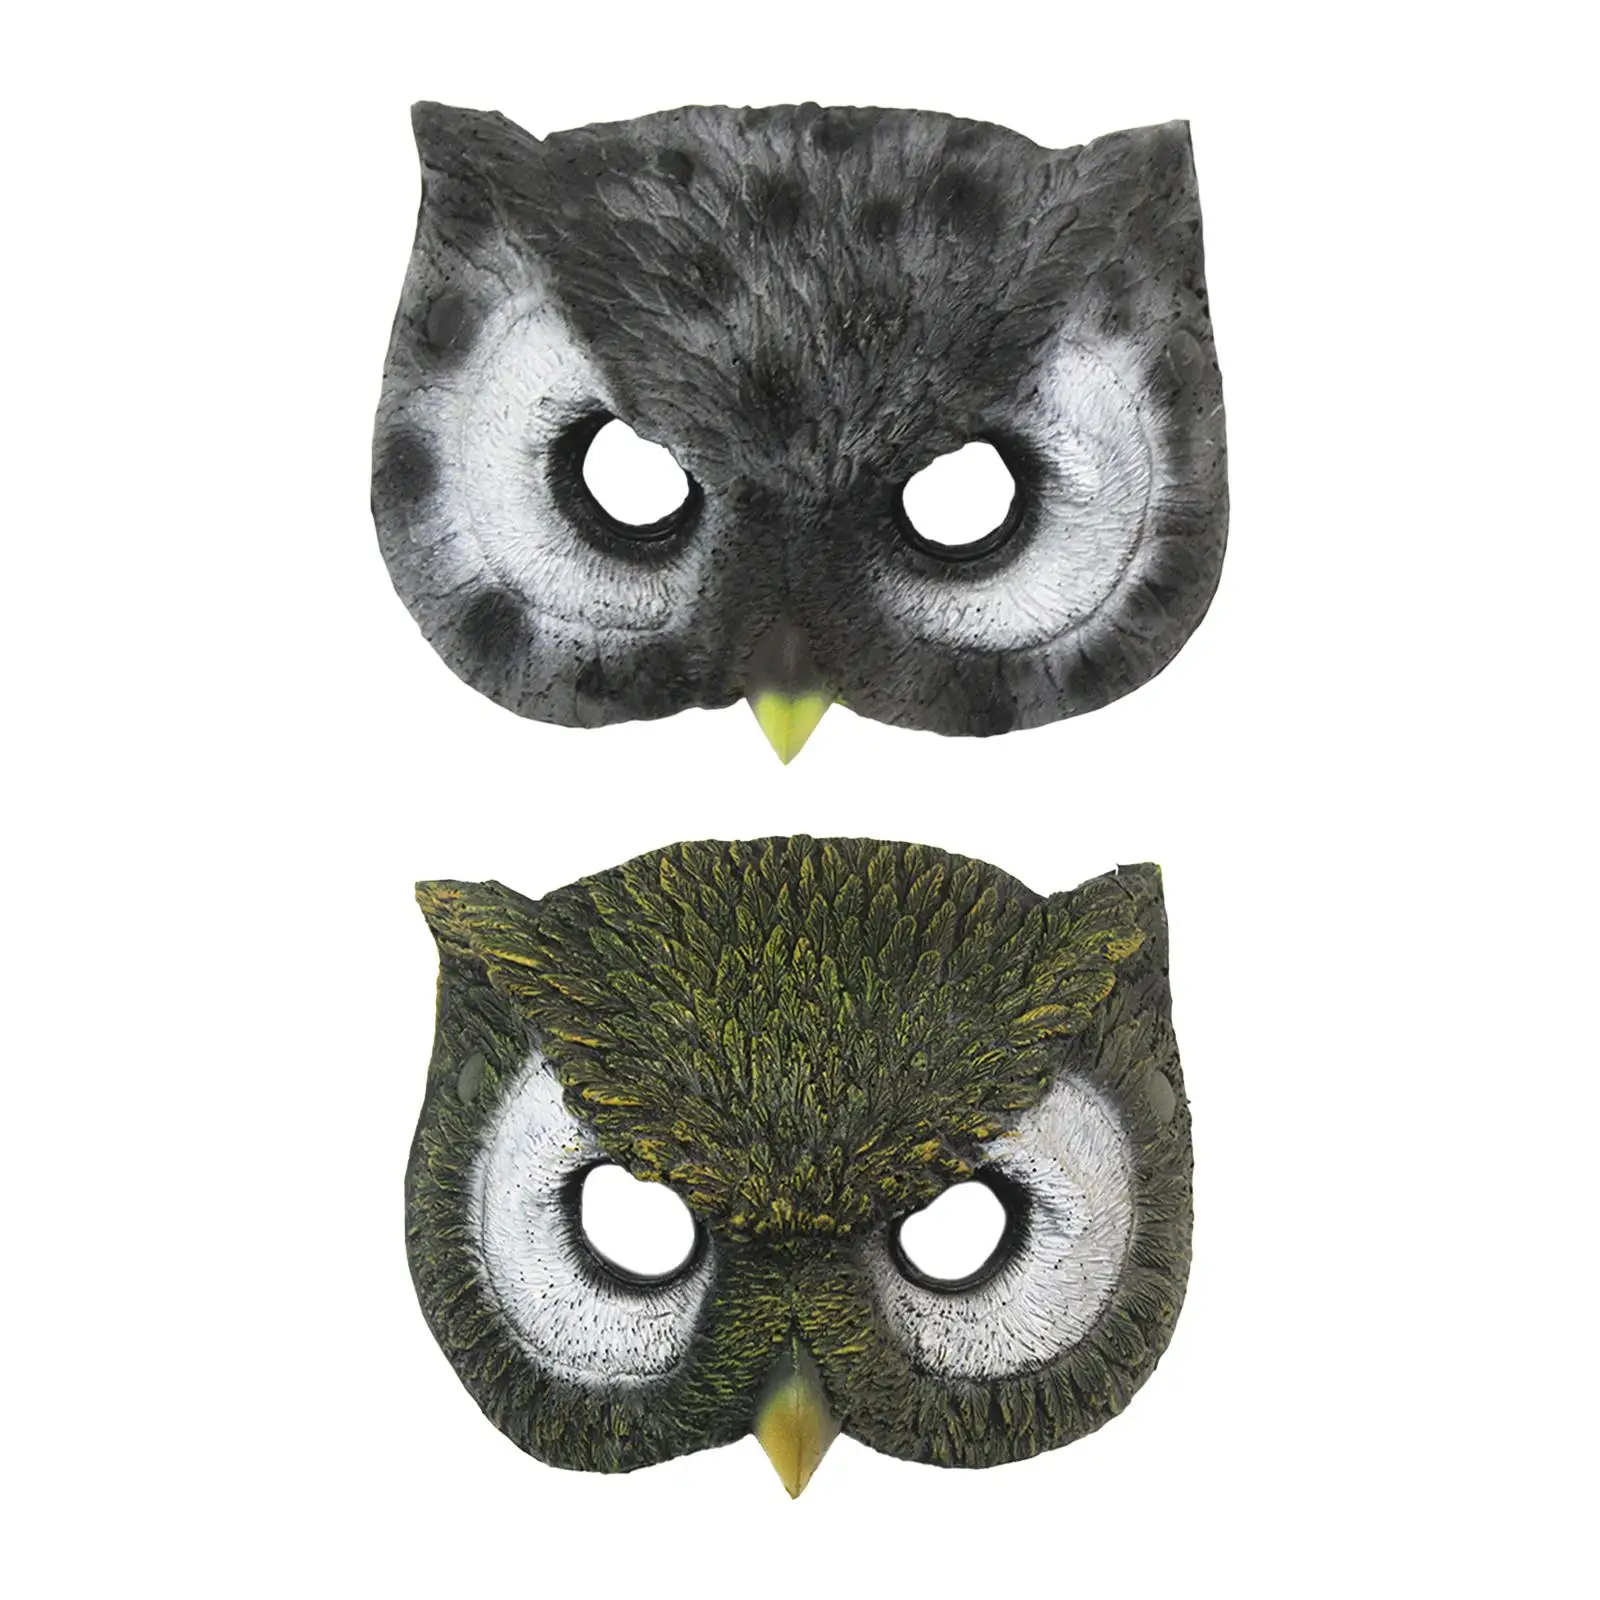 Owl Masks Cosplay Clothes Decoration Fancy Dress Half Face Mask Bird Masks for Adults Nightclub Festival Masquerade Ball Party